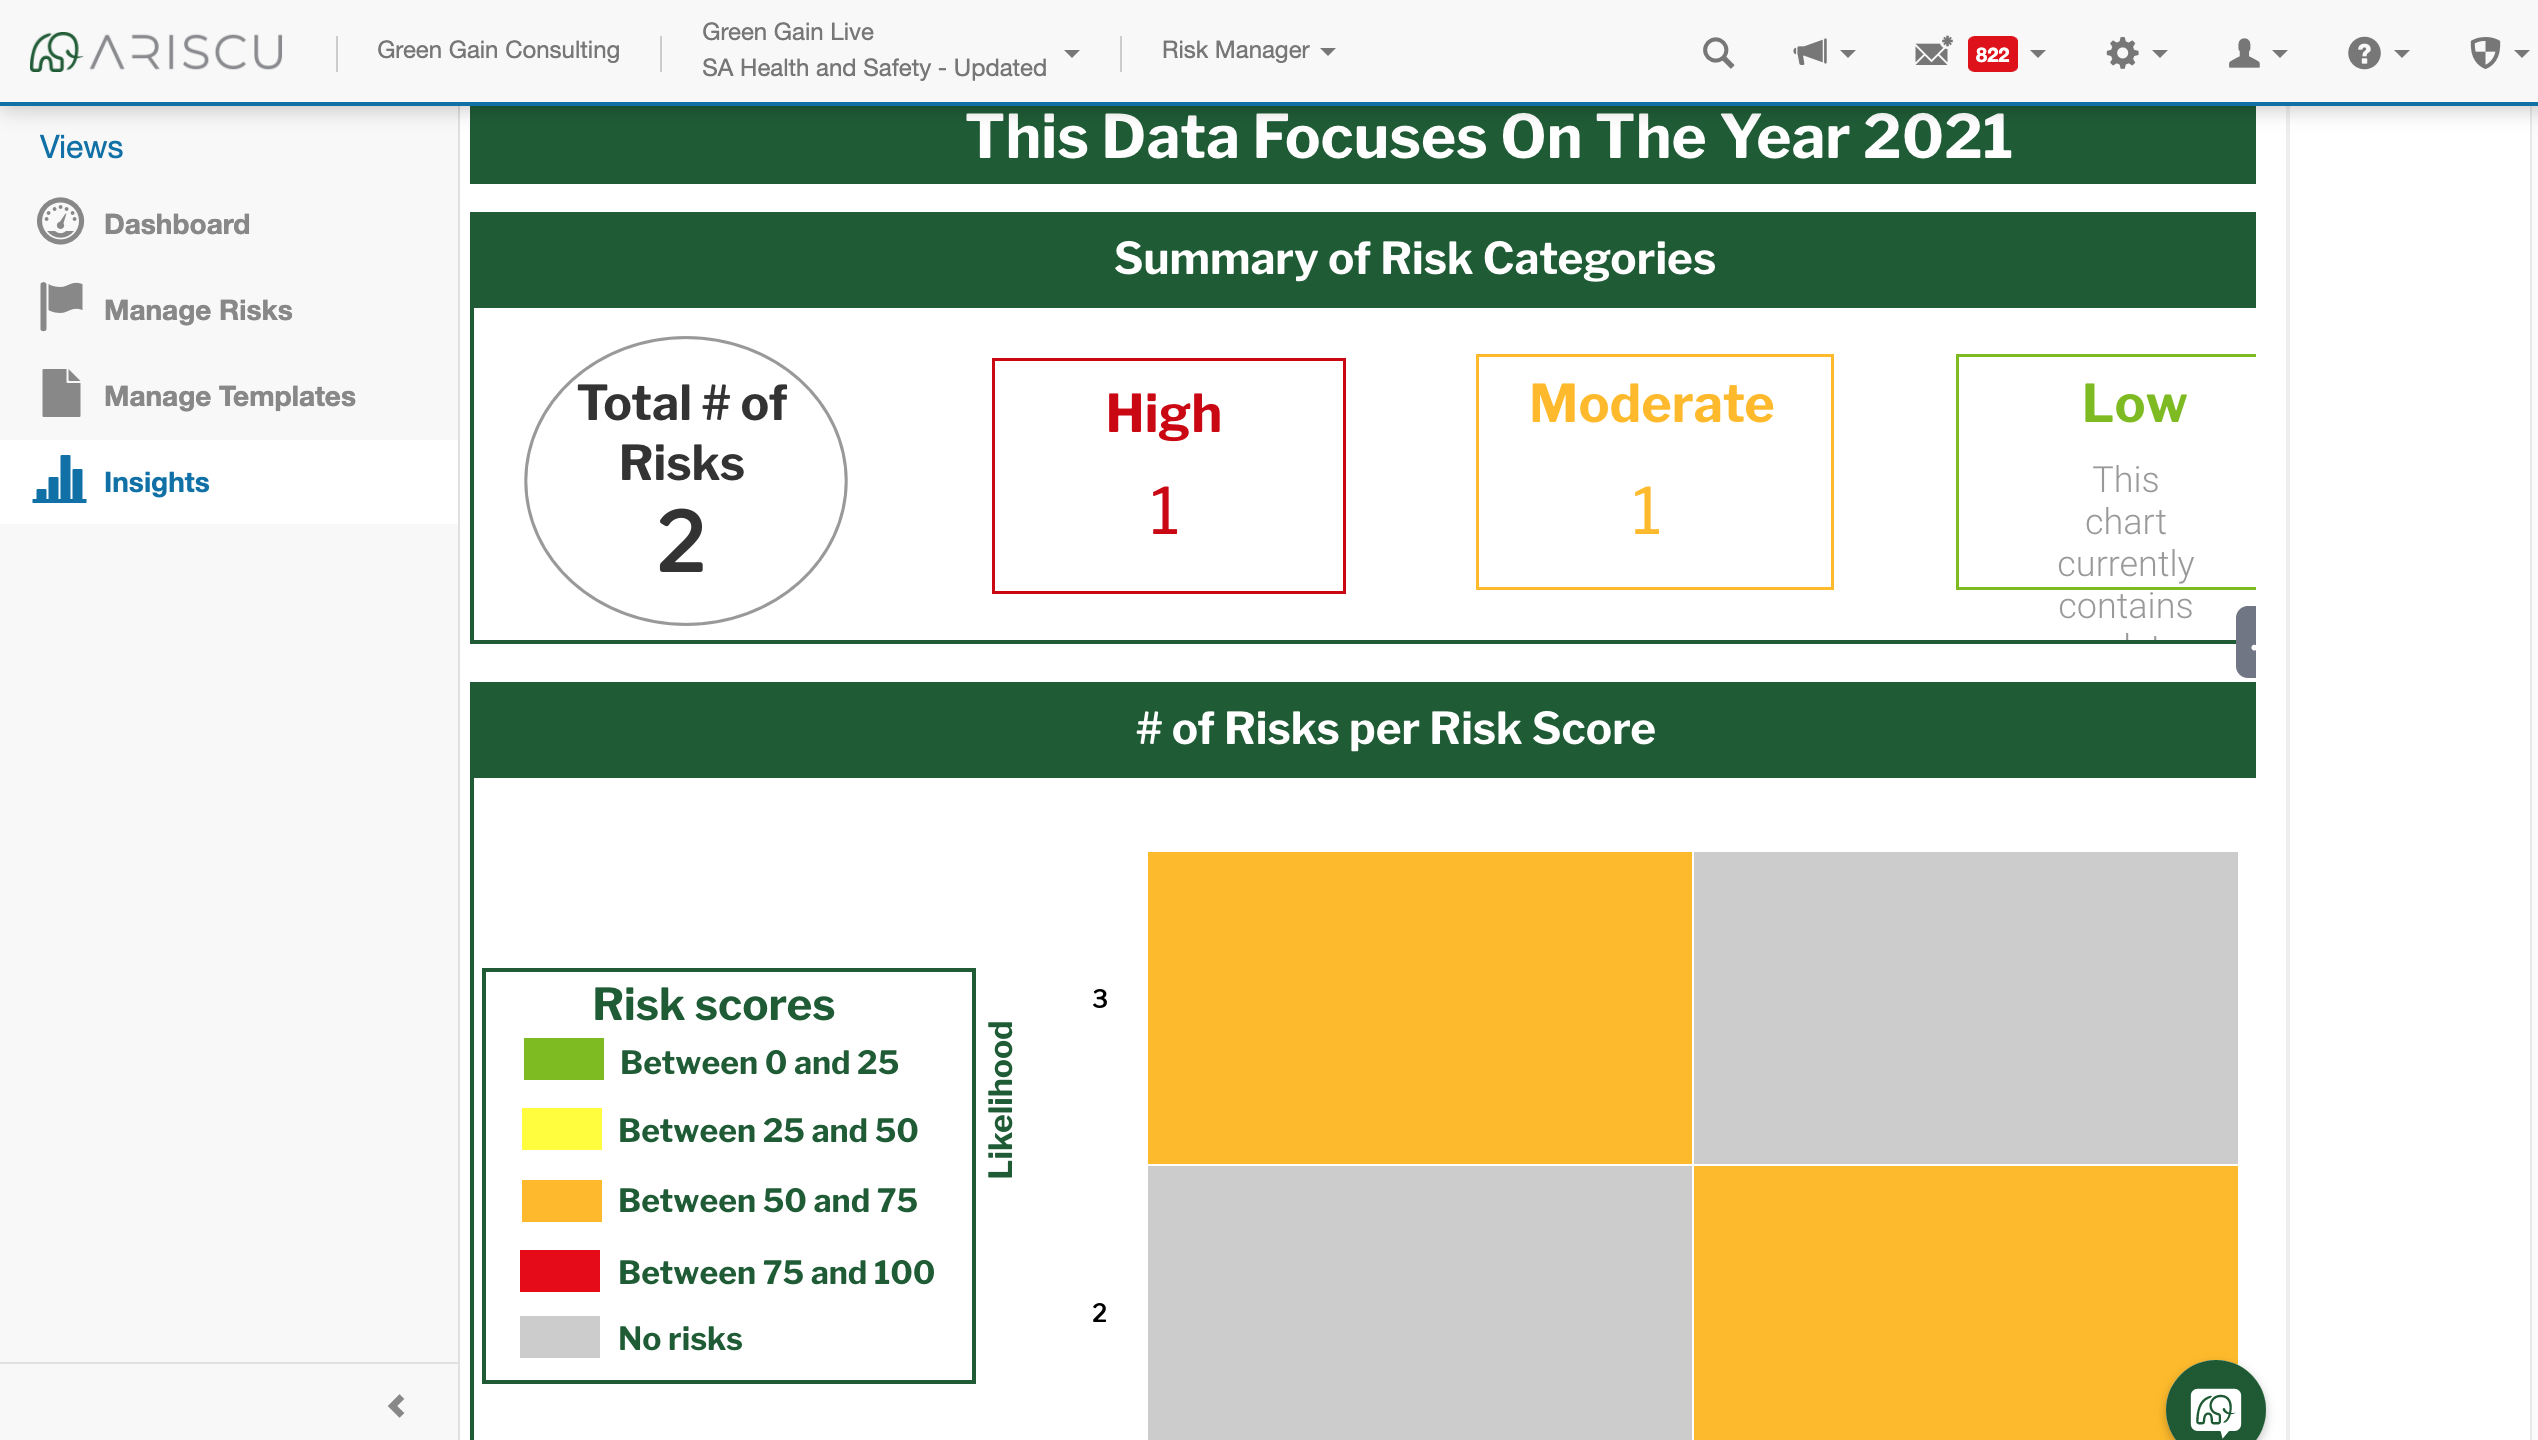 The risk module enables identification, monitoring and scheduling mitigating actions based on risk value (impact x probability).